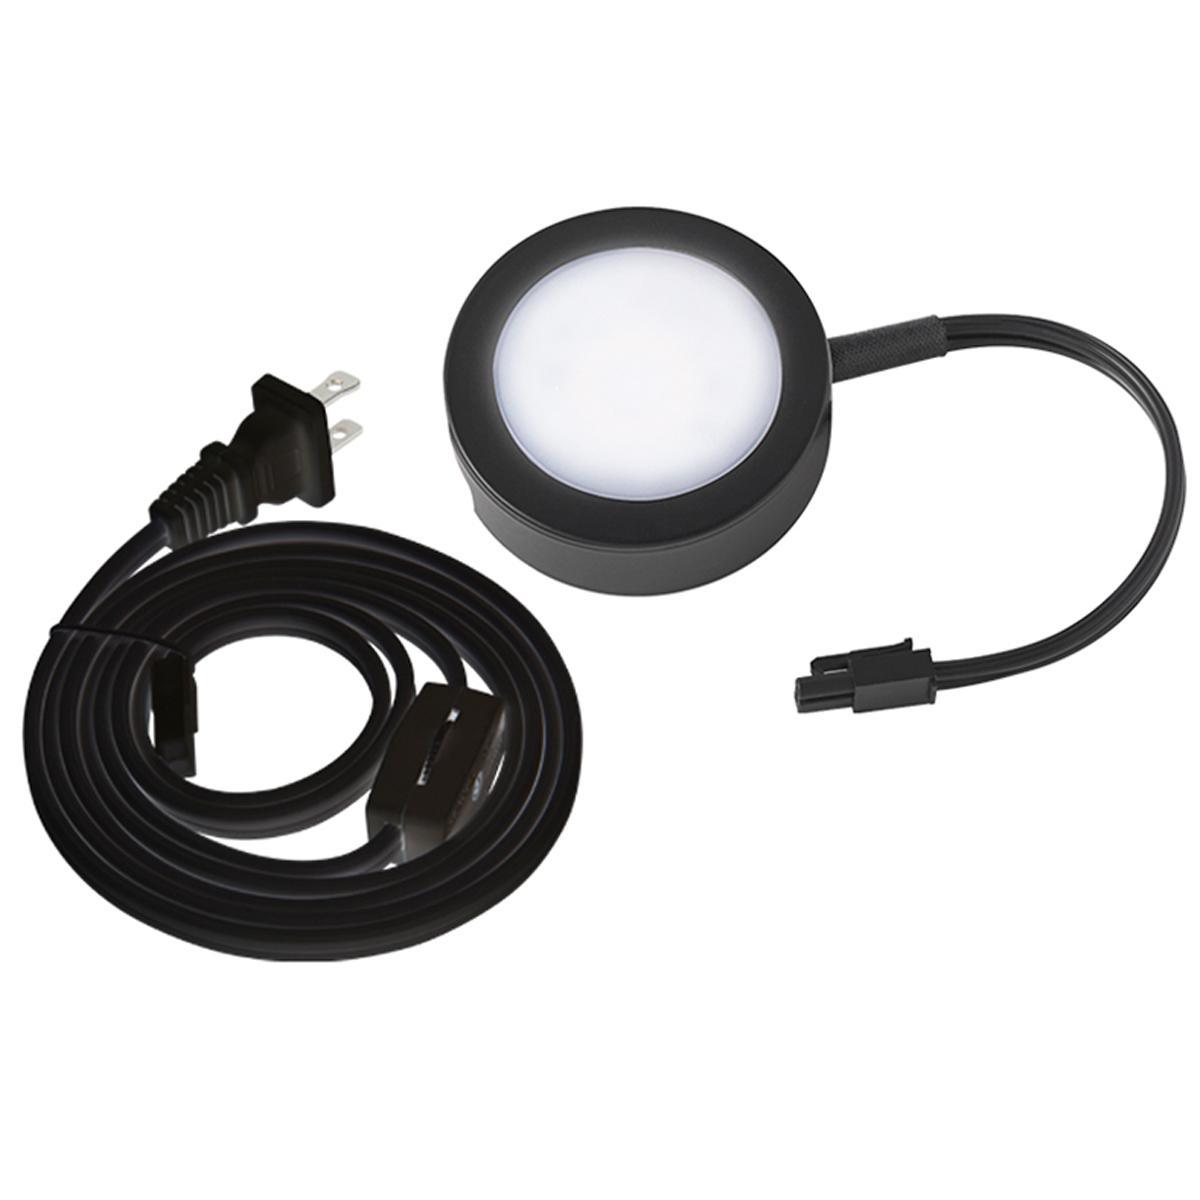 3-CCT LED Puck Light with Lead Wire and Power Cord, 3" Wide, 27K/30K/35K, 120V - Bees Lighting